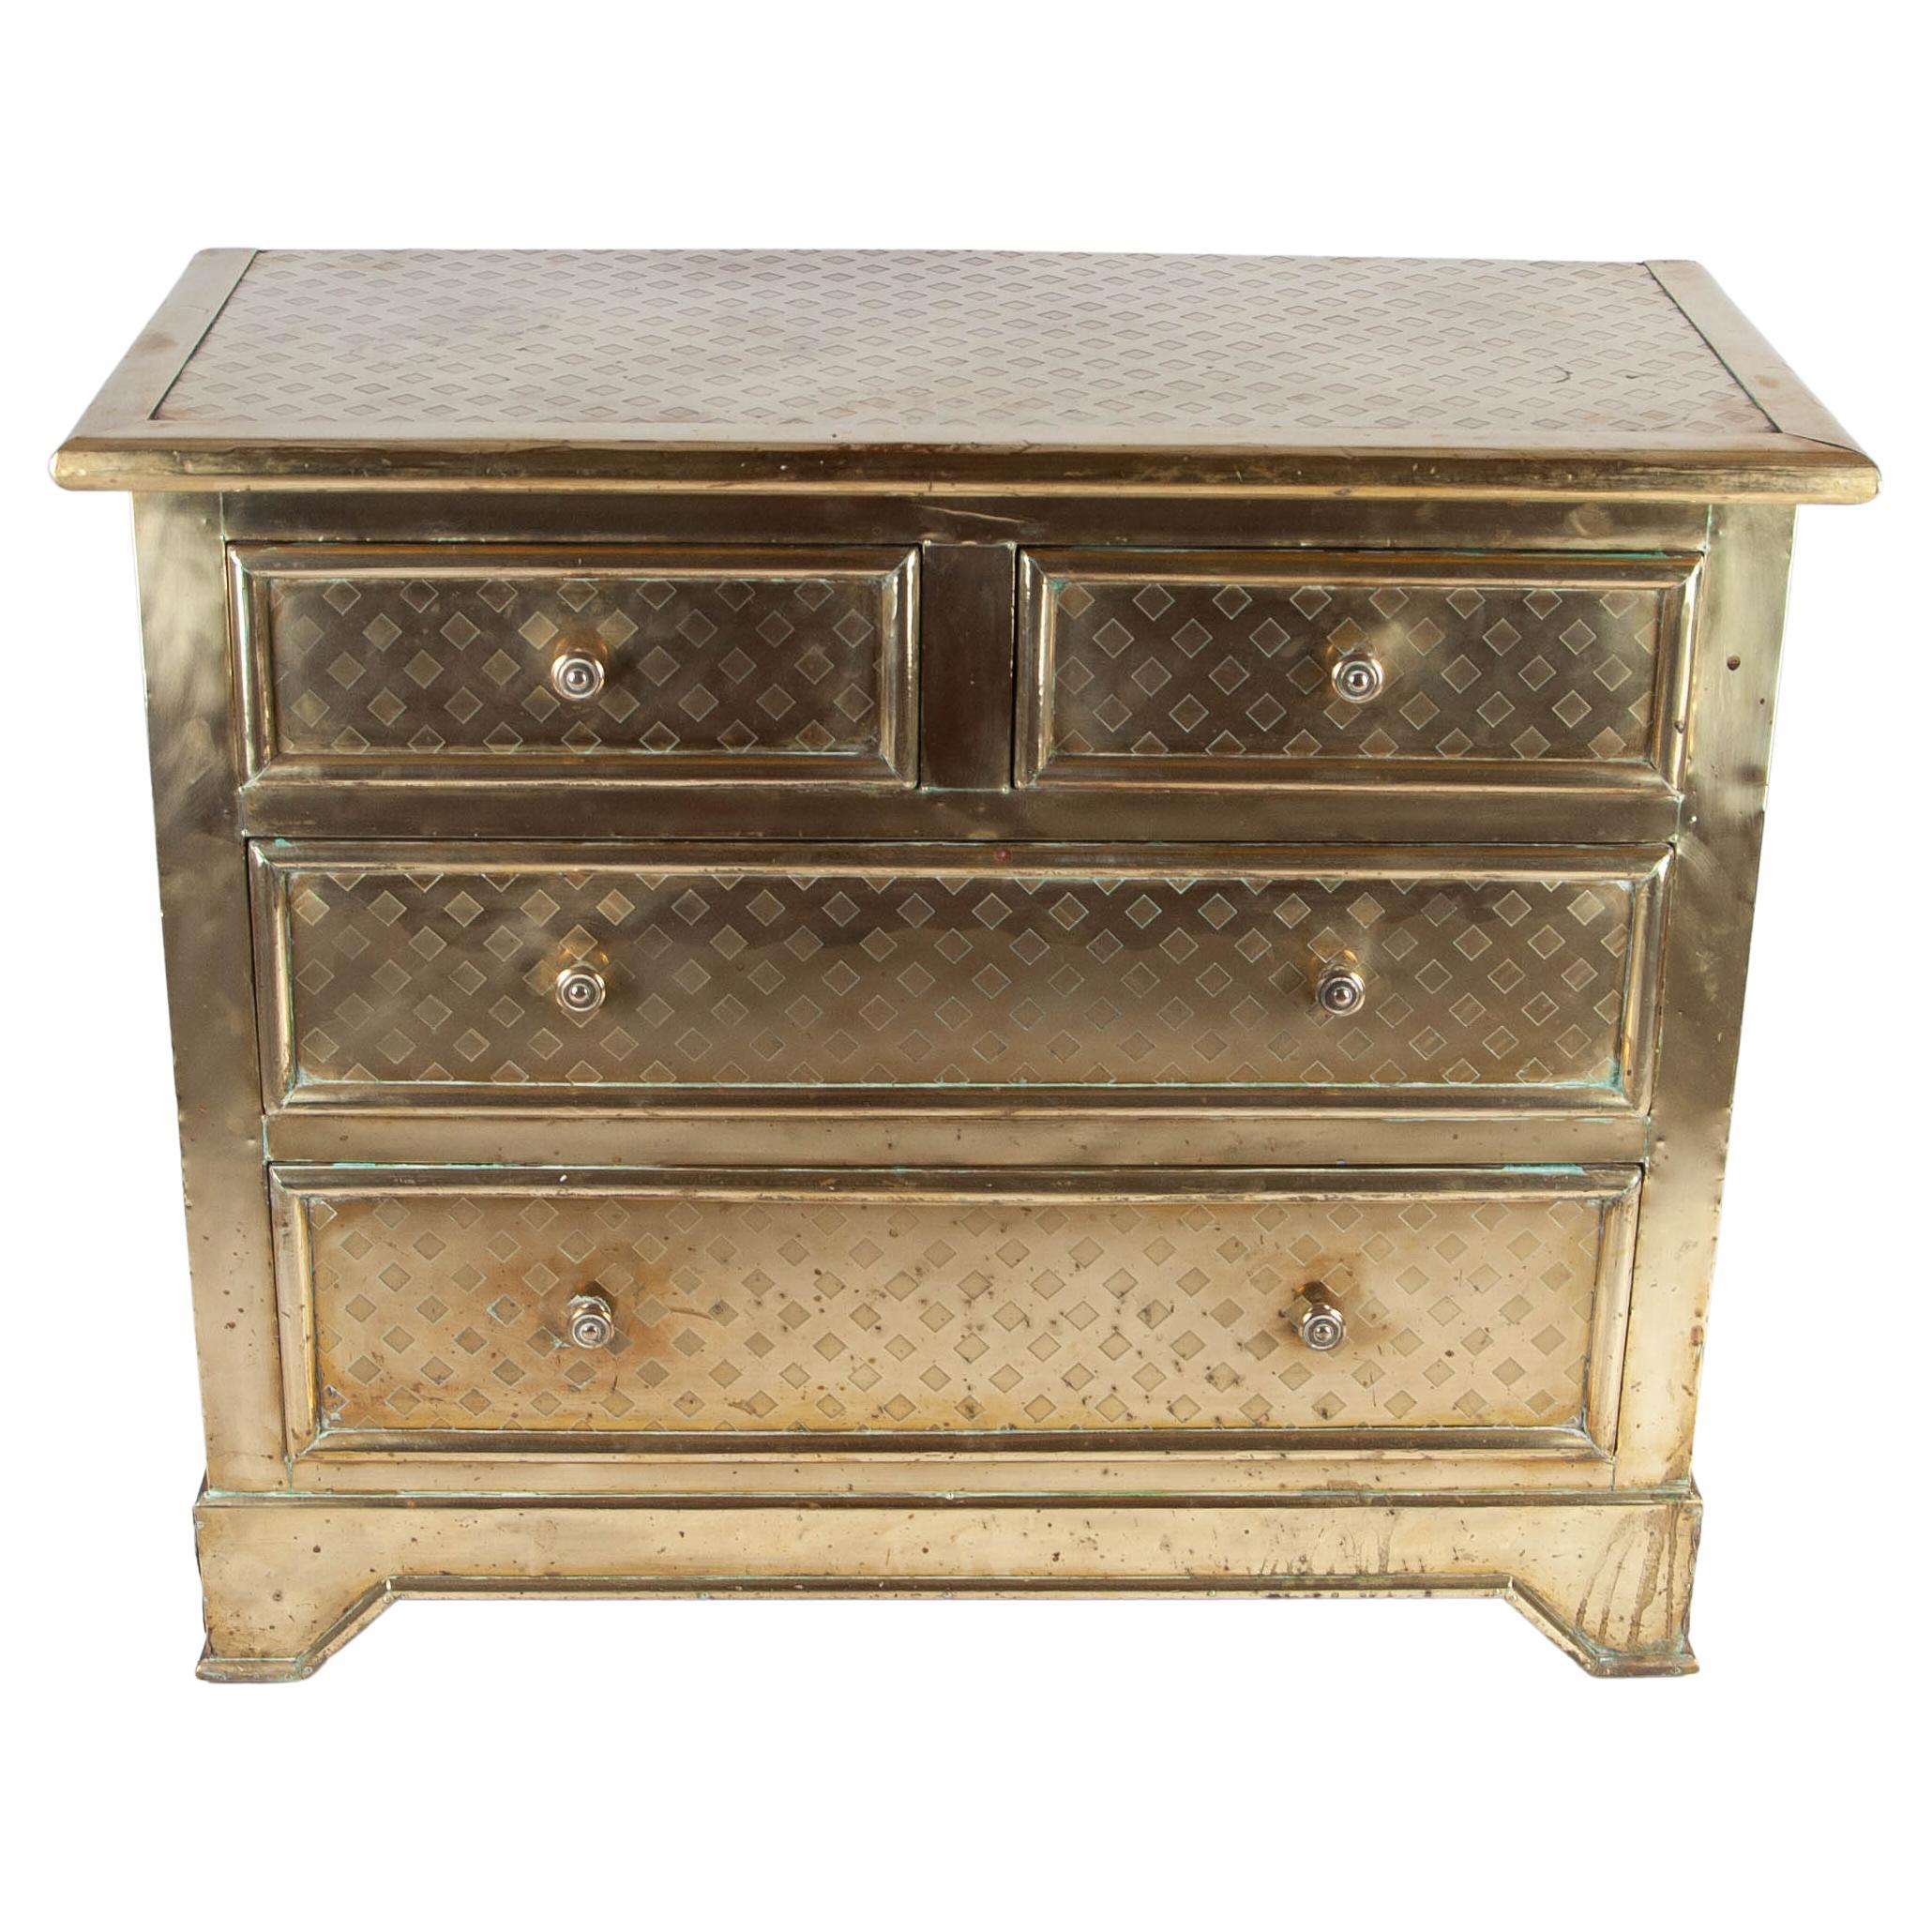 Vintage Chest of Drawers with Brass Plating